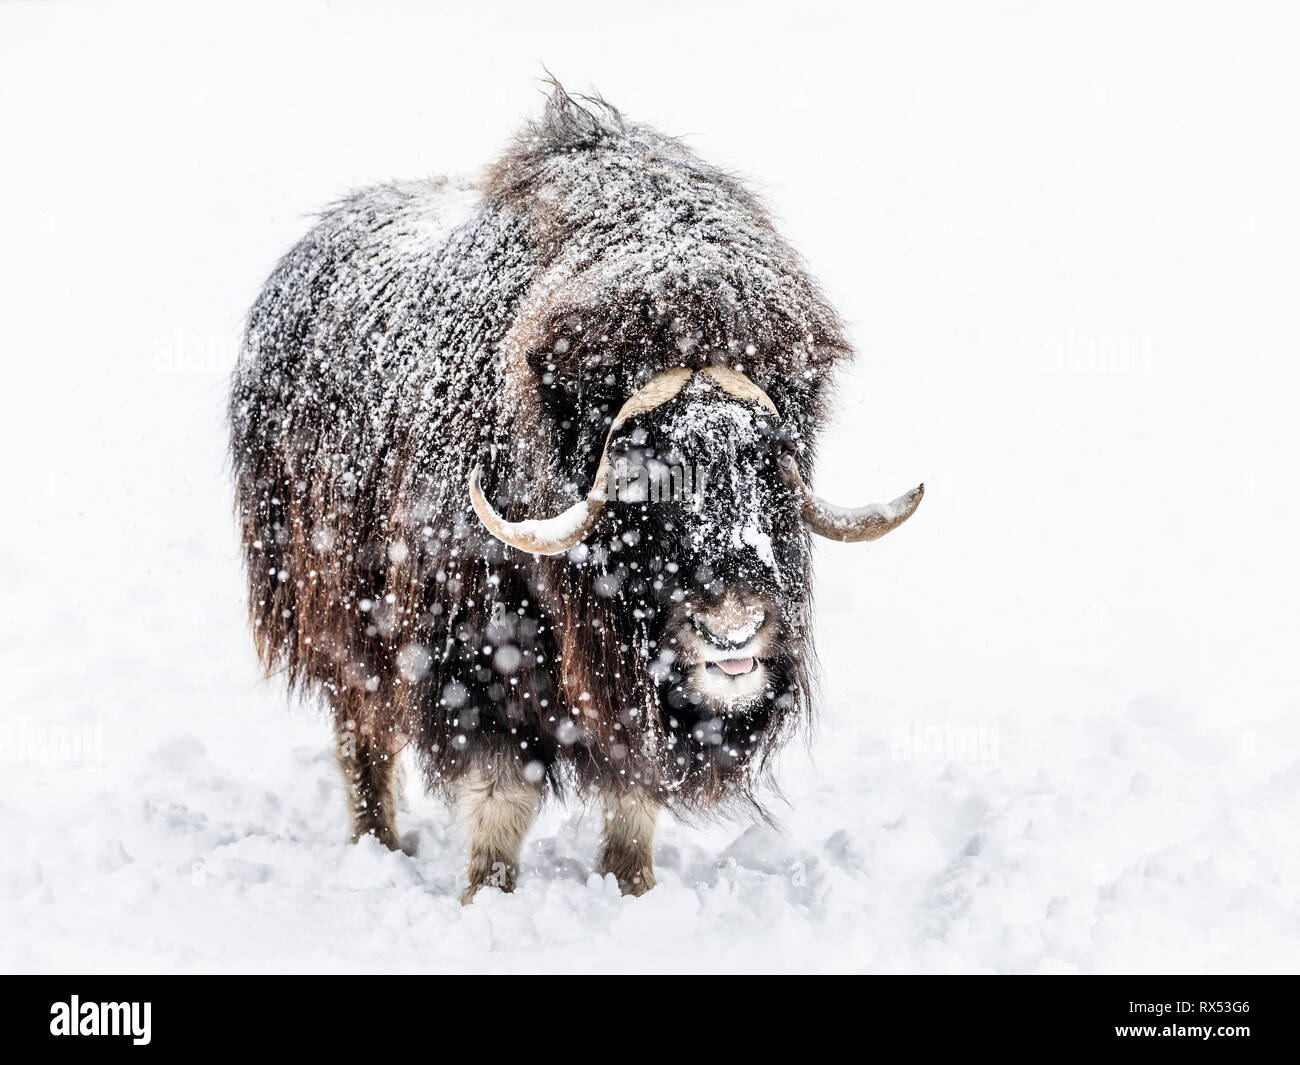 Muskox, Ovibos moschatus, in a winter snow storm or blizzard, captive animal, Manitoba, Canada. Stock Photo